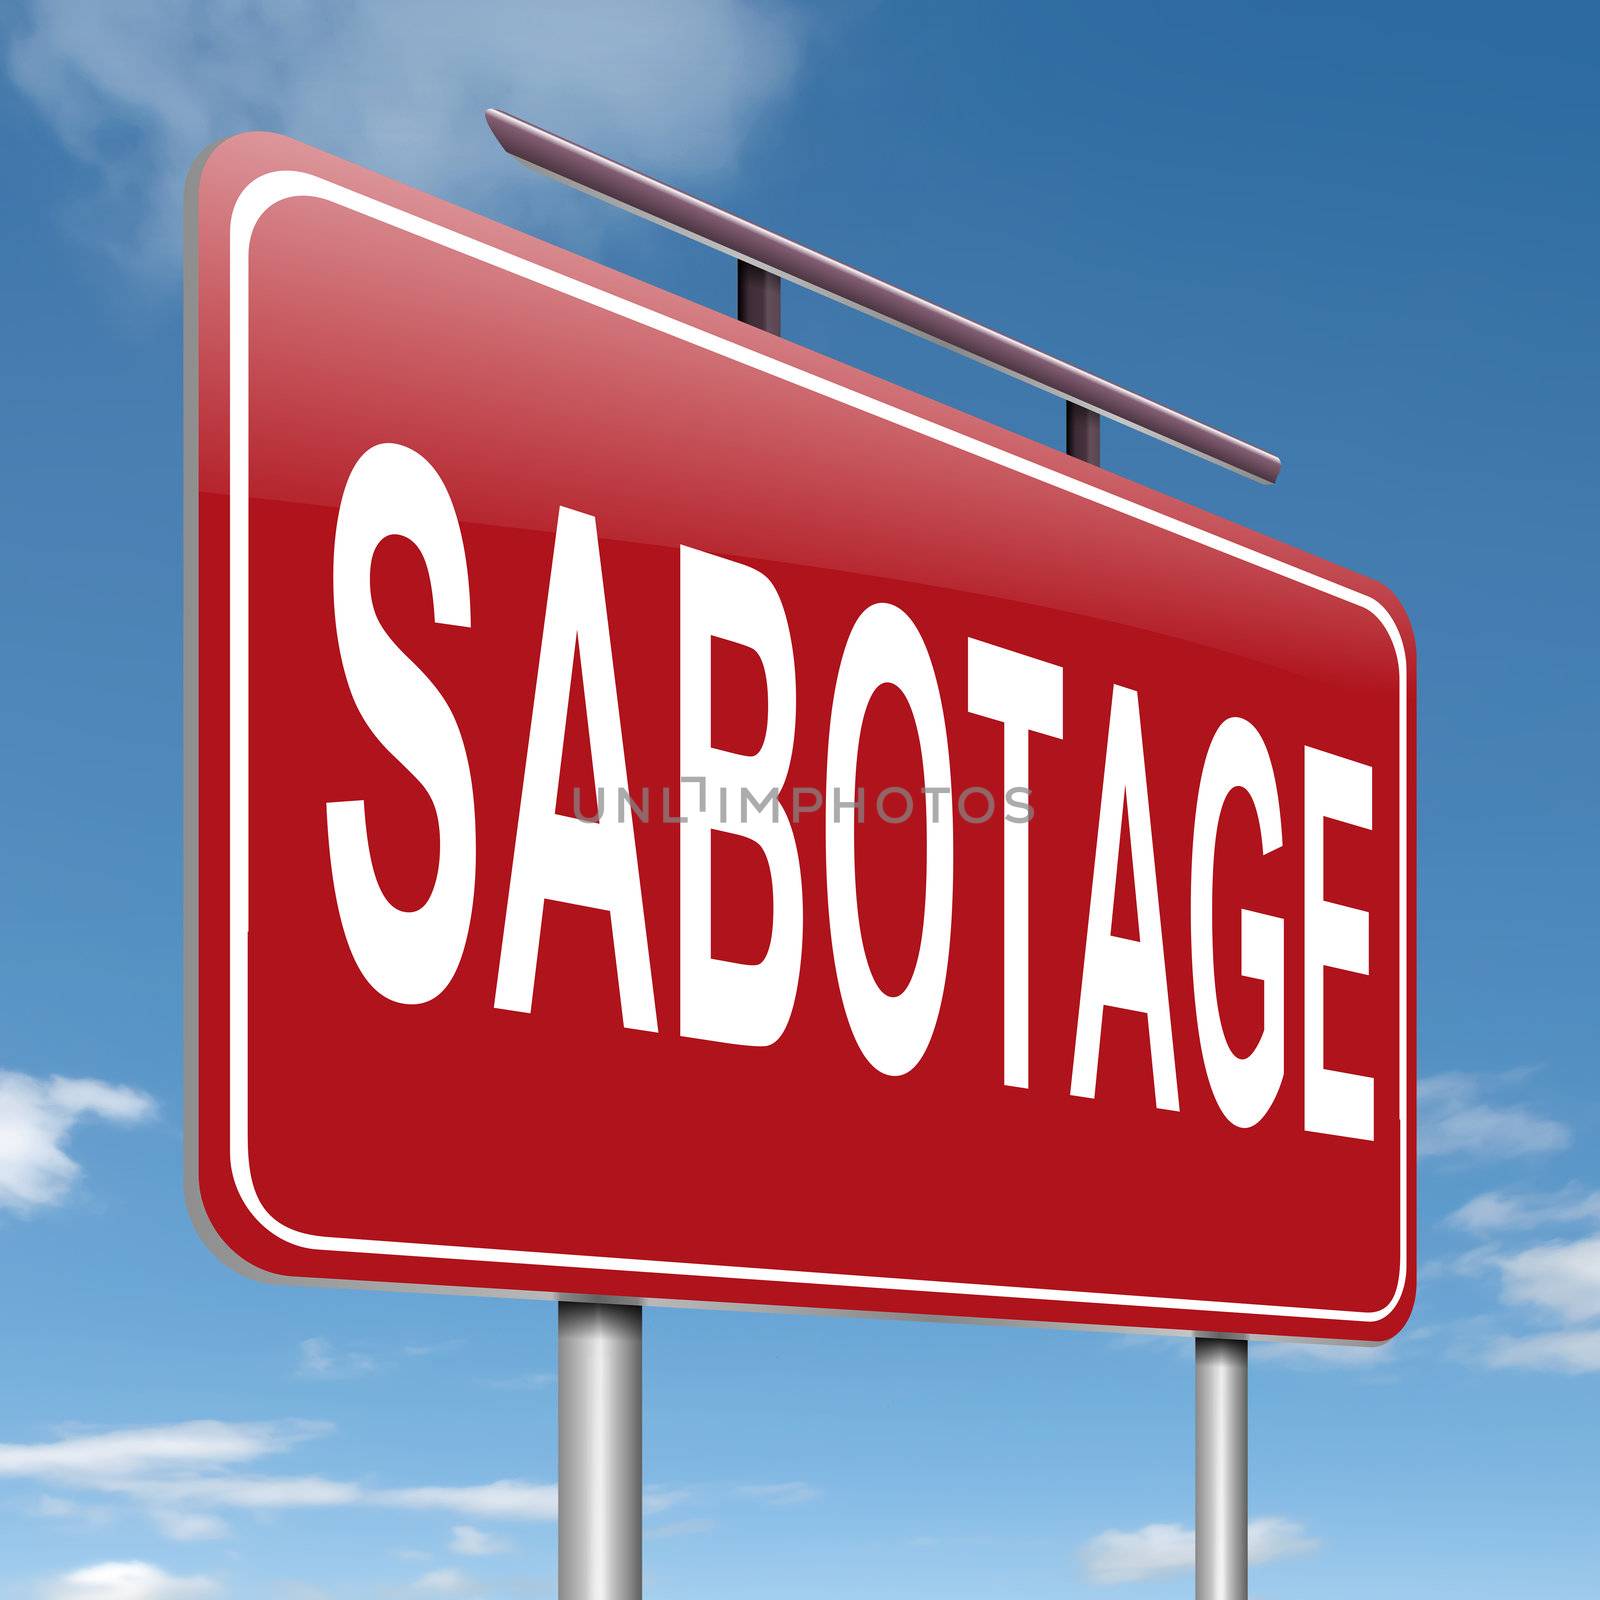 Illustration depicting a sign with a sabotage concept.